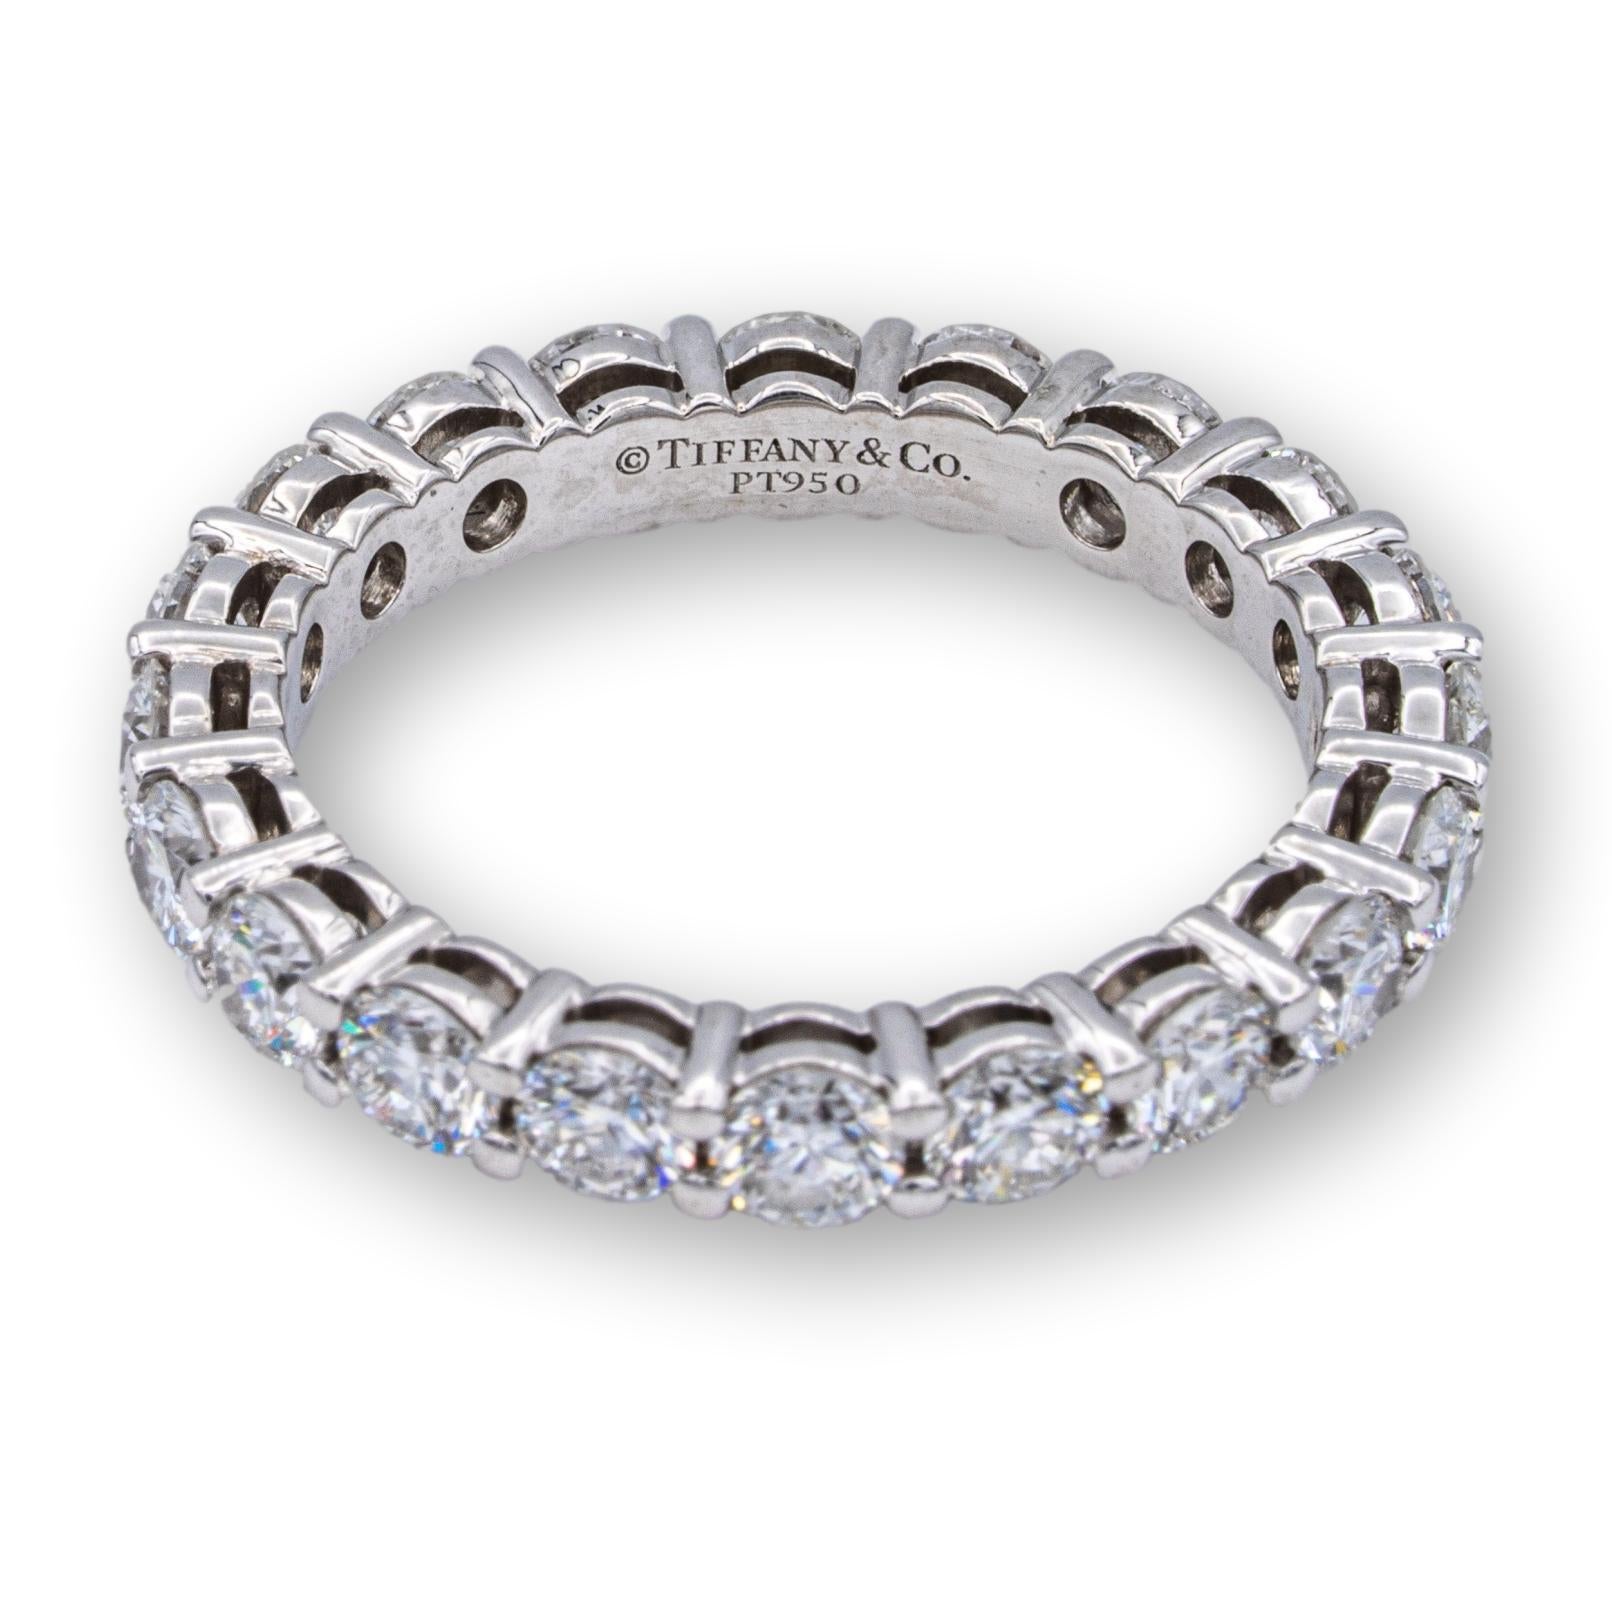 Tiffany & Co. Embrace band ring finely crafted in platinum with 20 round brilliant cut diamonds set in shared prongs all the way around weighing 1.64 cts. total weight ranging G-H color, VS clarity with an open gallery design.

Brand: Tiffany &